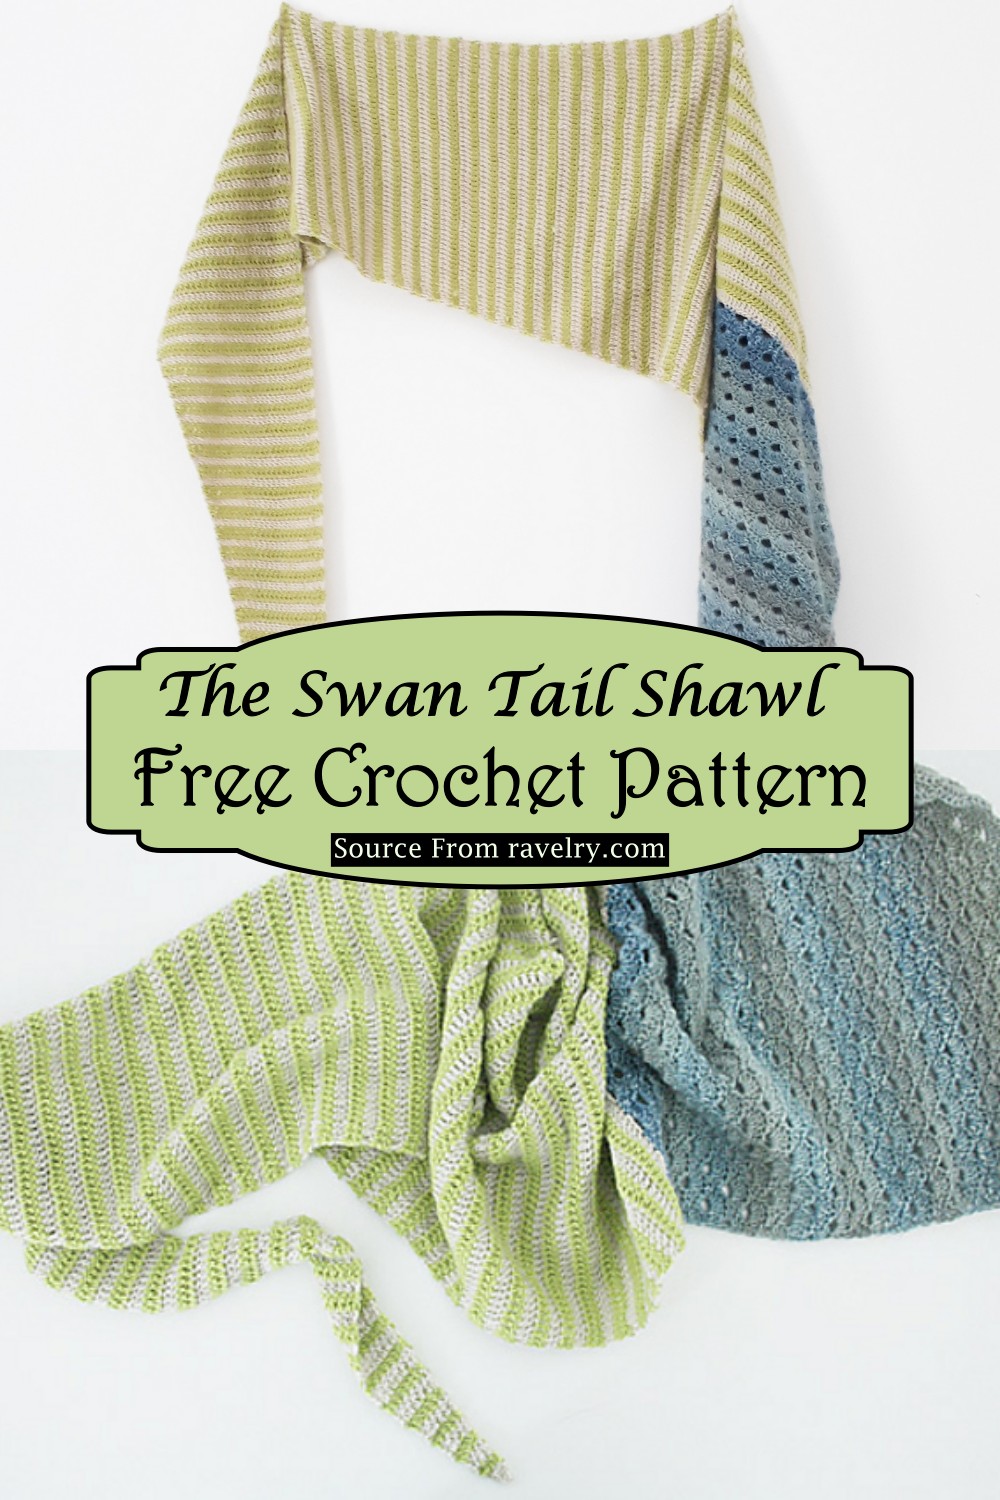 The Swan Tail Shawl